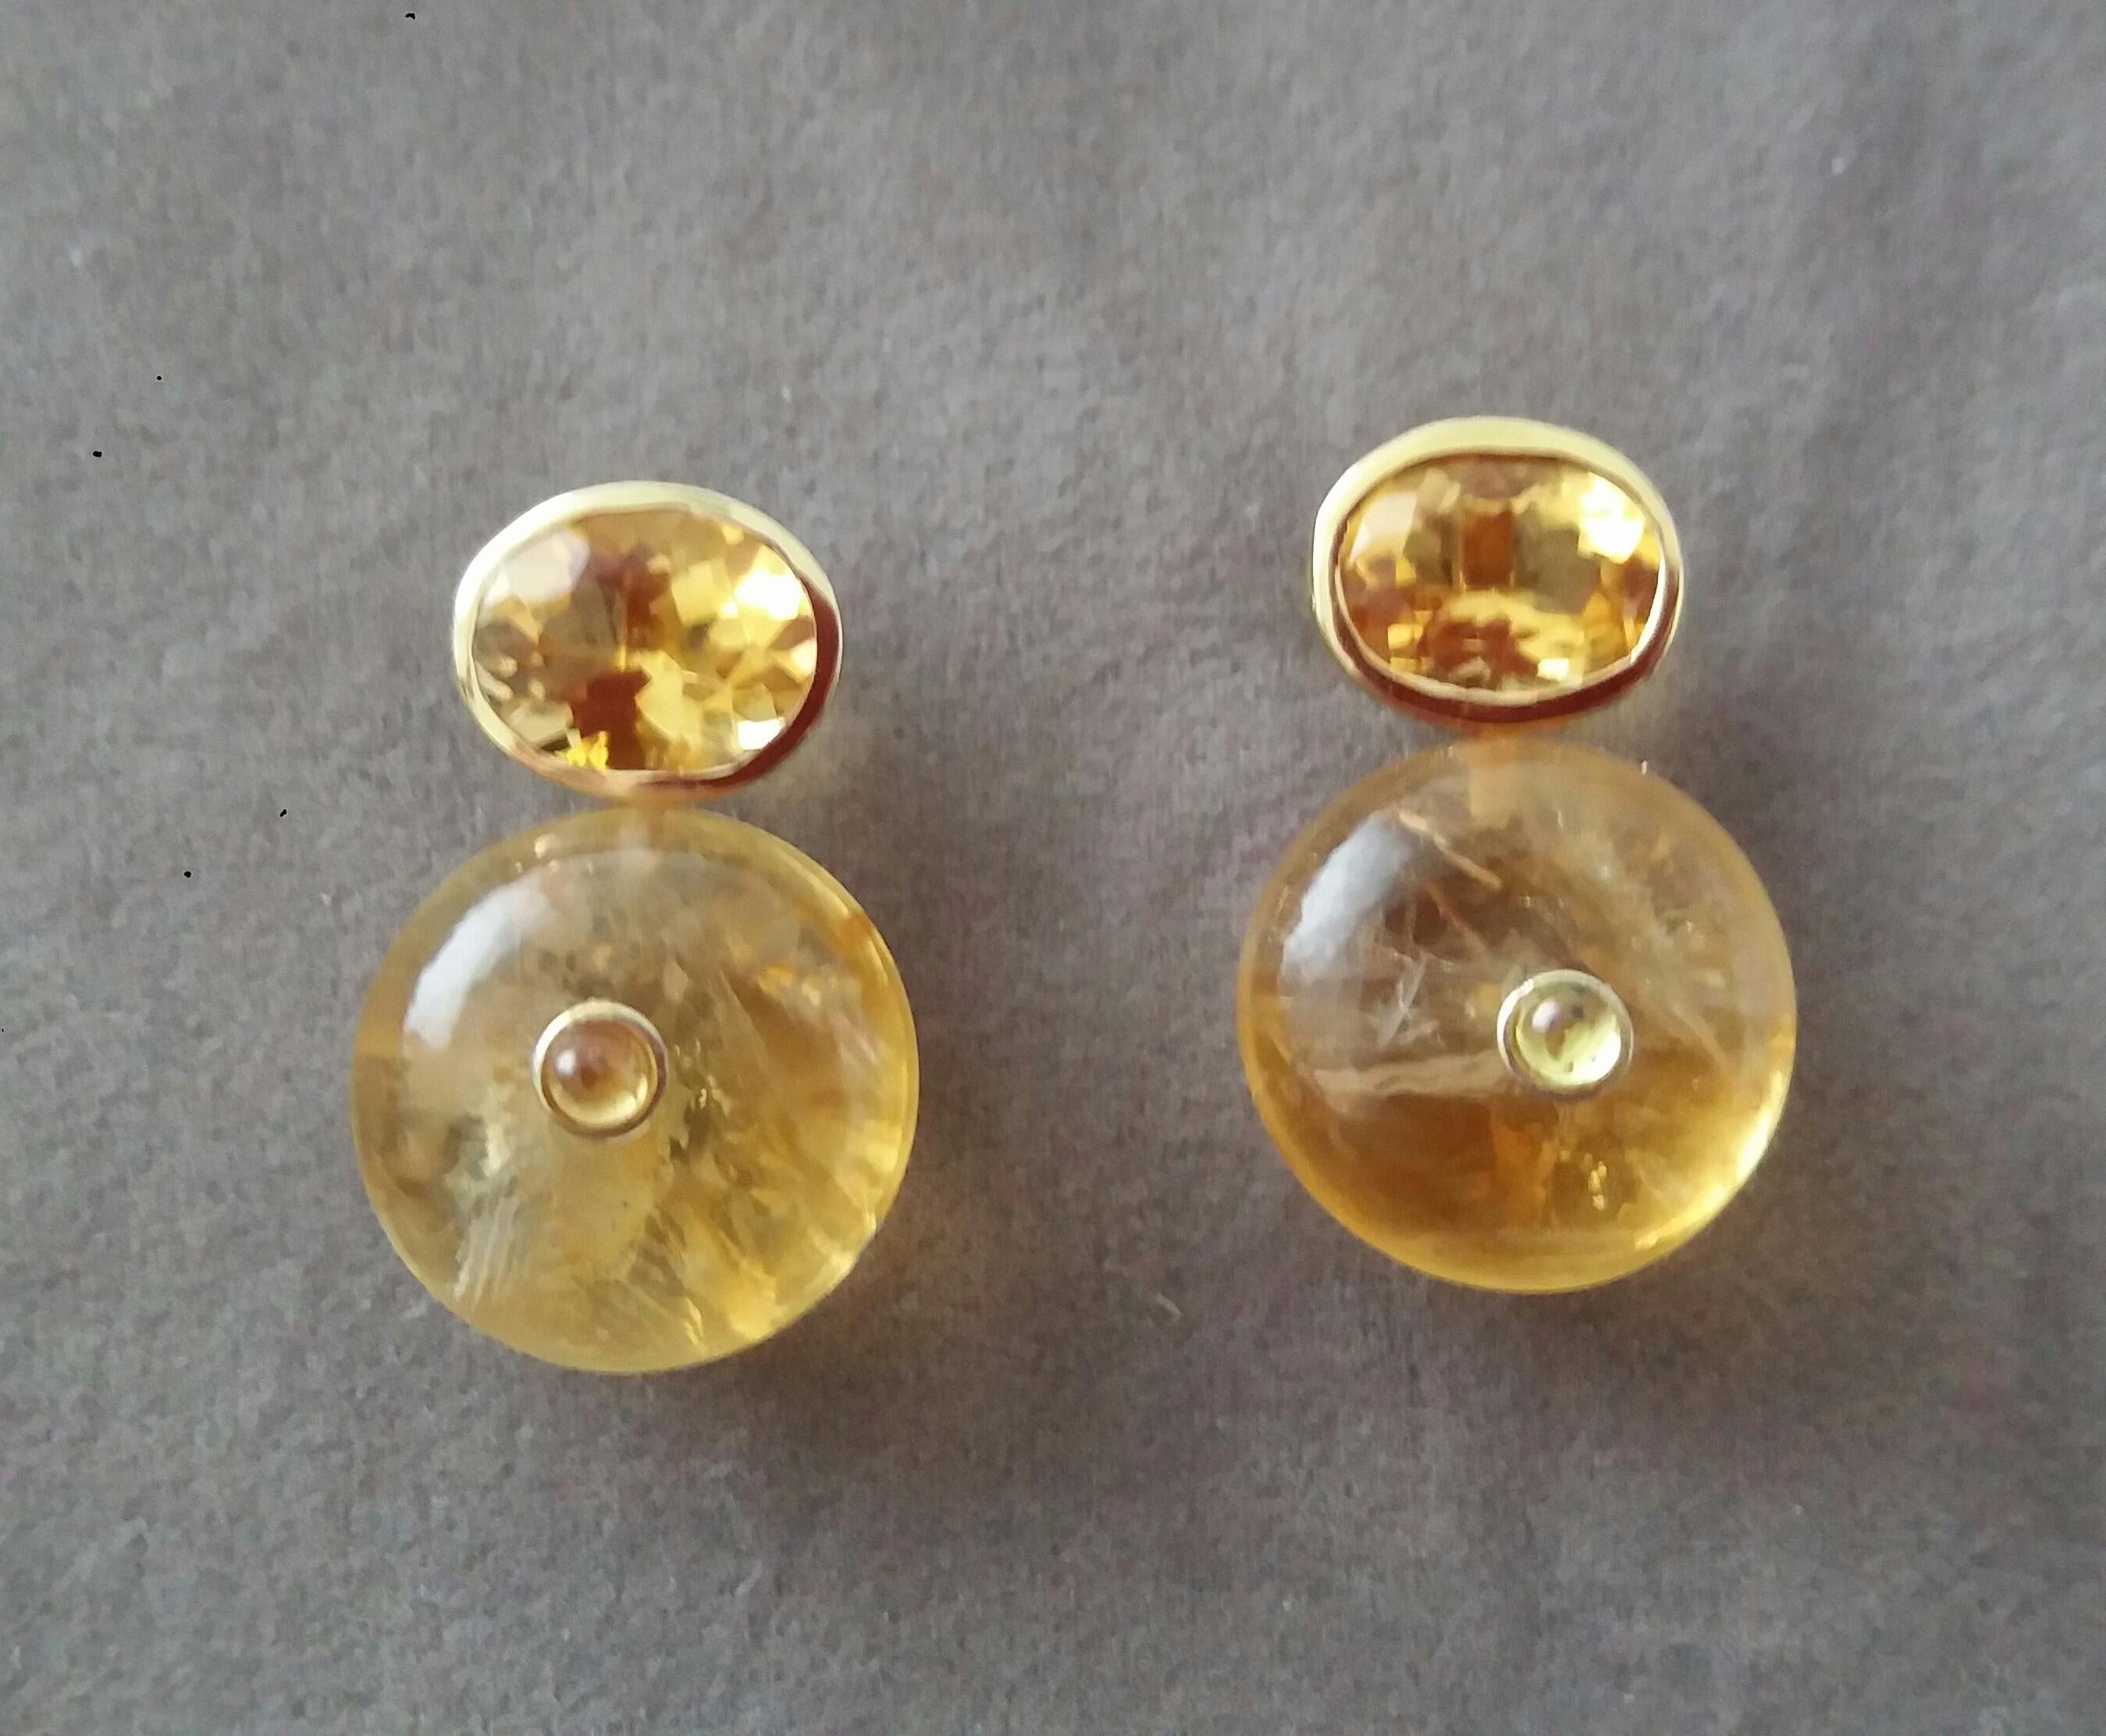 Simple chic stud earrings with a pair of Oval Cut Citrine measuring 8mm x10 mm set in solid 14 Kt. yellow gold on the top and in the lower parts 2 Round Plain Wheel Shape Citrine  16 mm .in diameter with a small round Yellow Sapphire cab in the